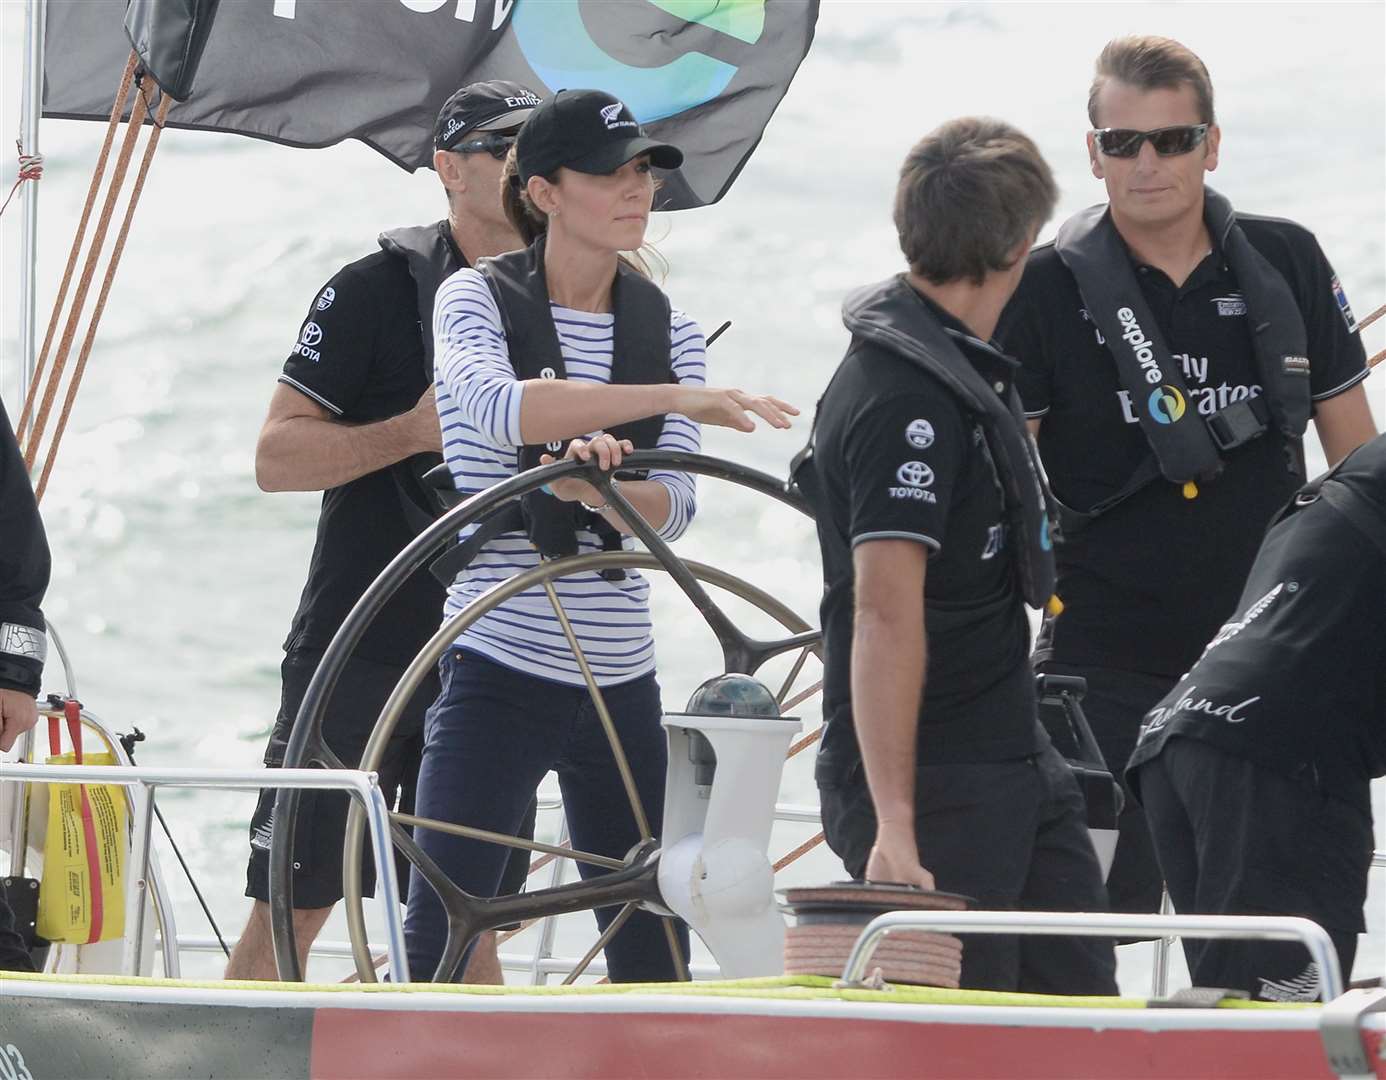 Kate racing against William on two Emirates Team New Zealand America’s Cup yachts in 2014 (Anthony Devlin/PA)